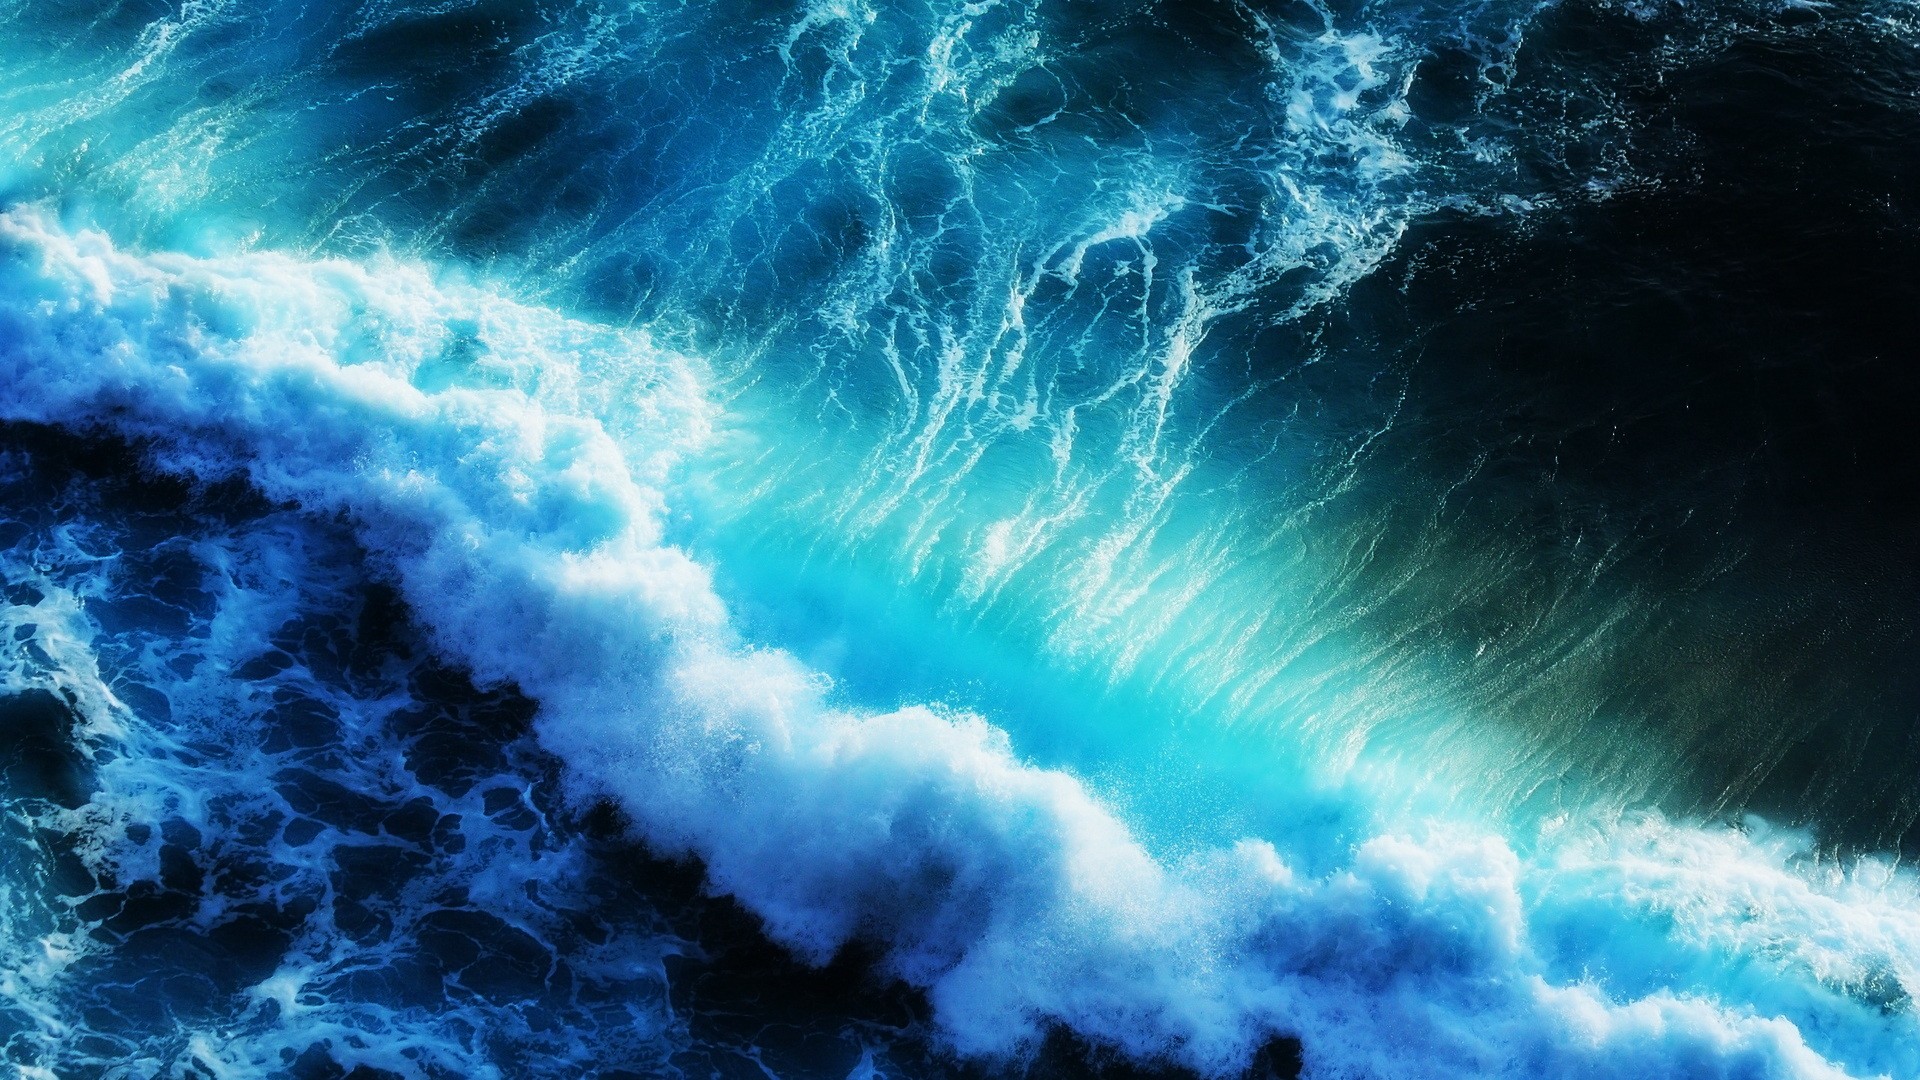 General 1920x1080 nature sea waves